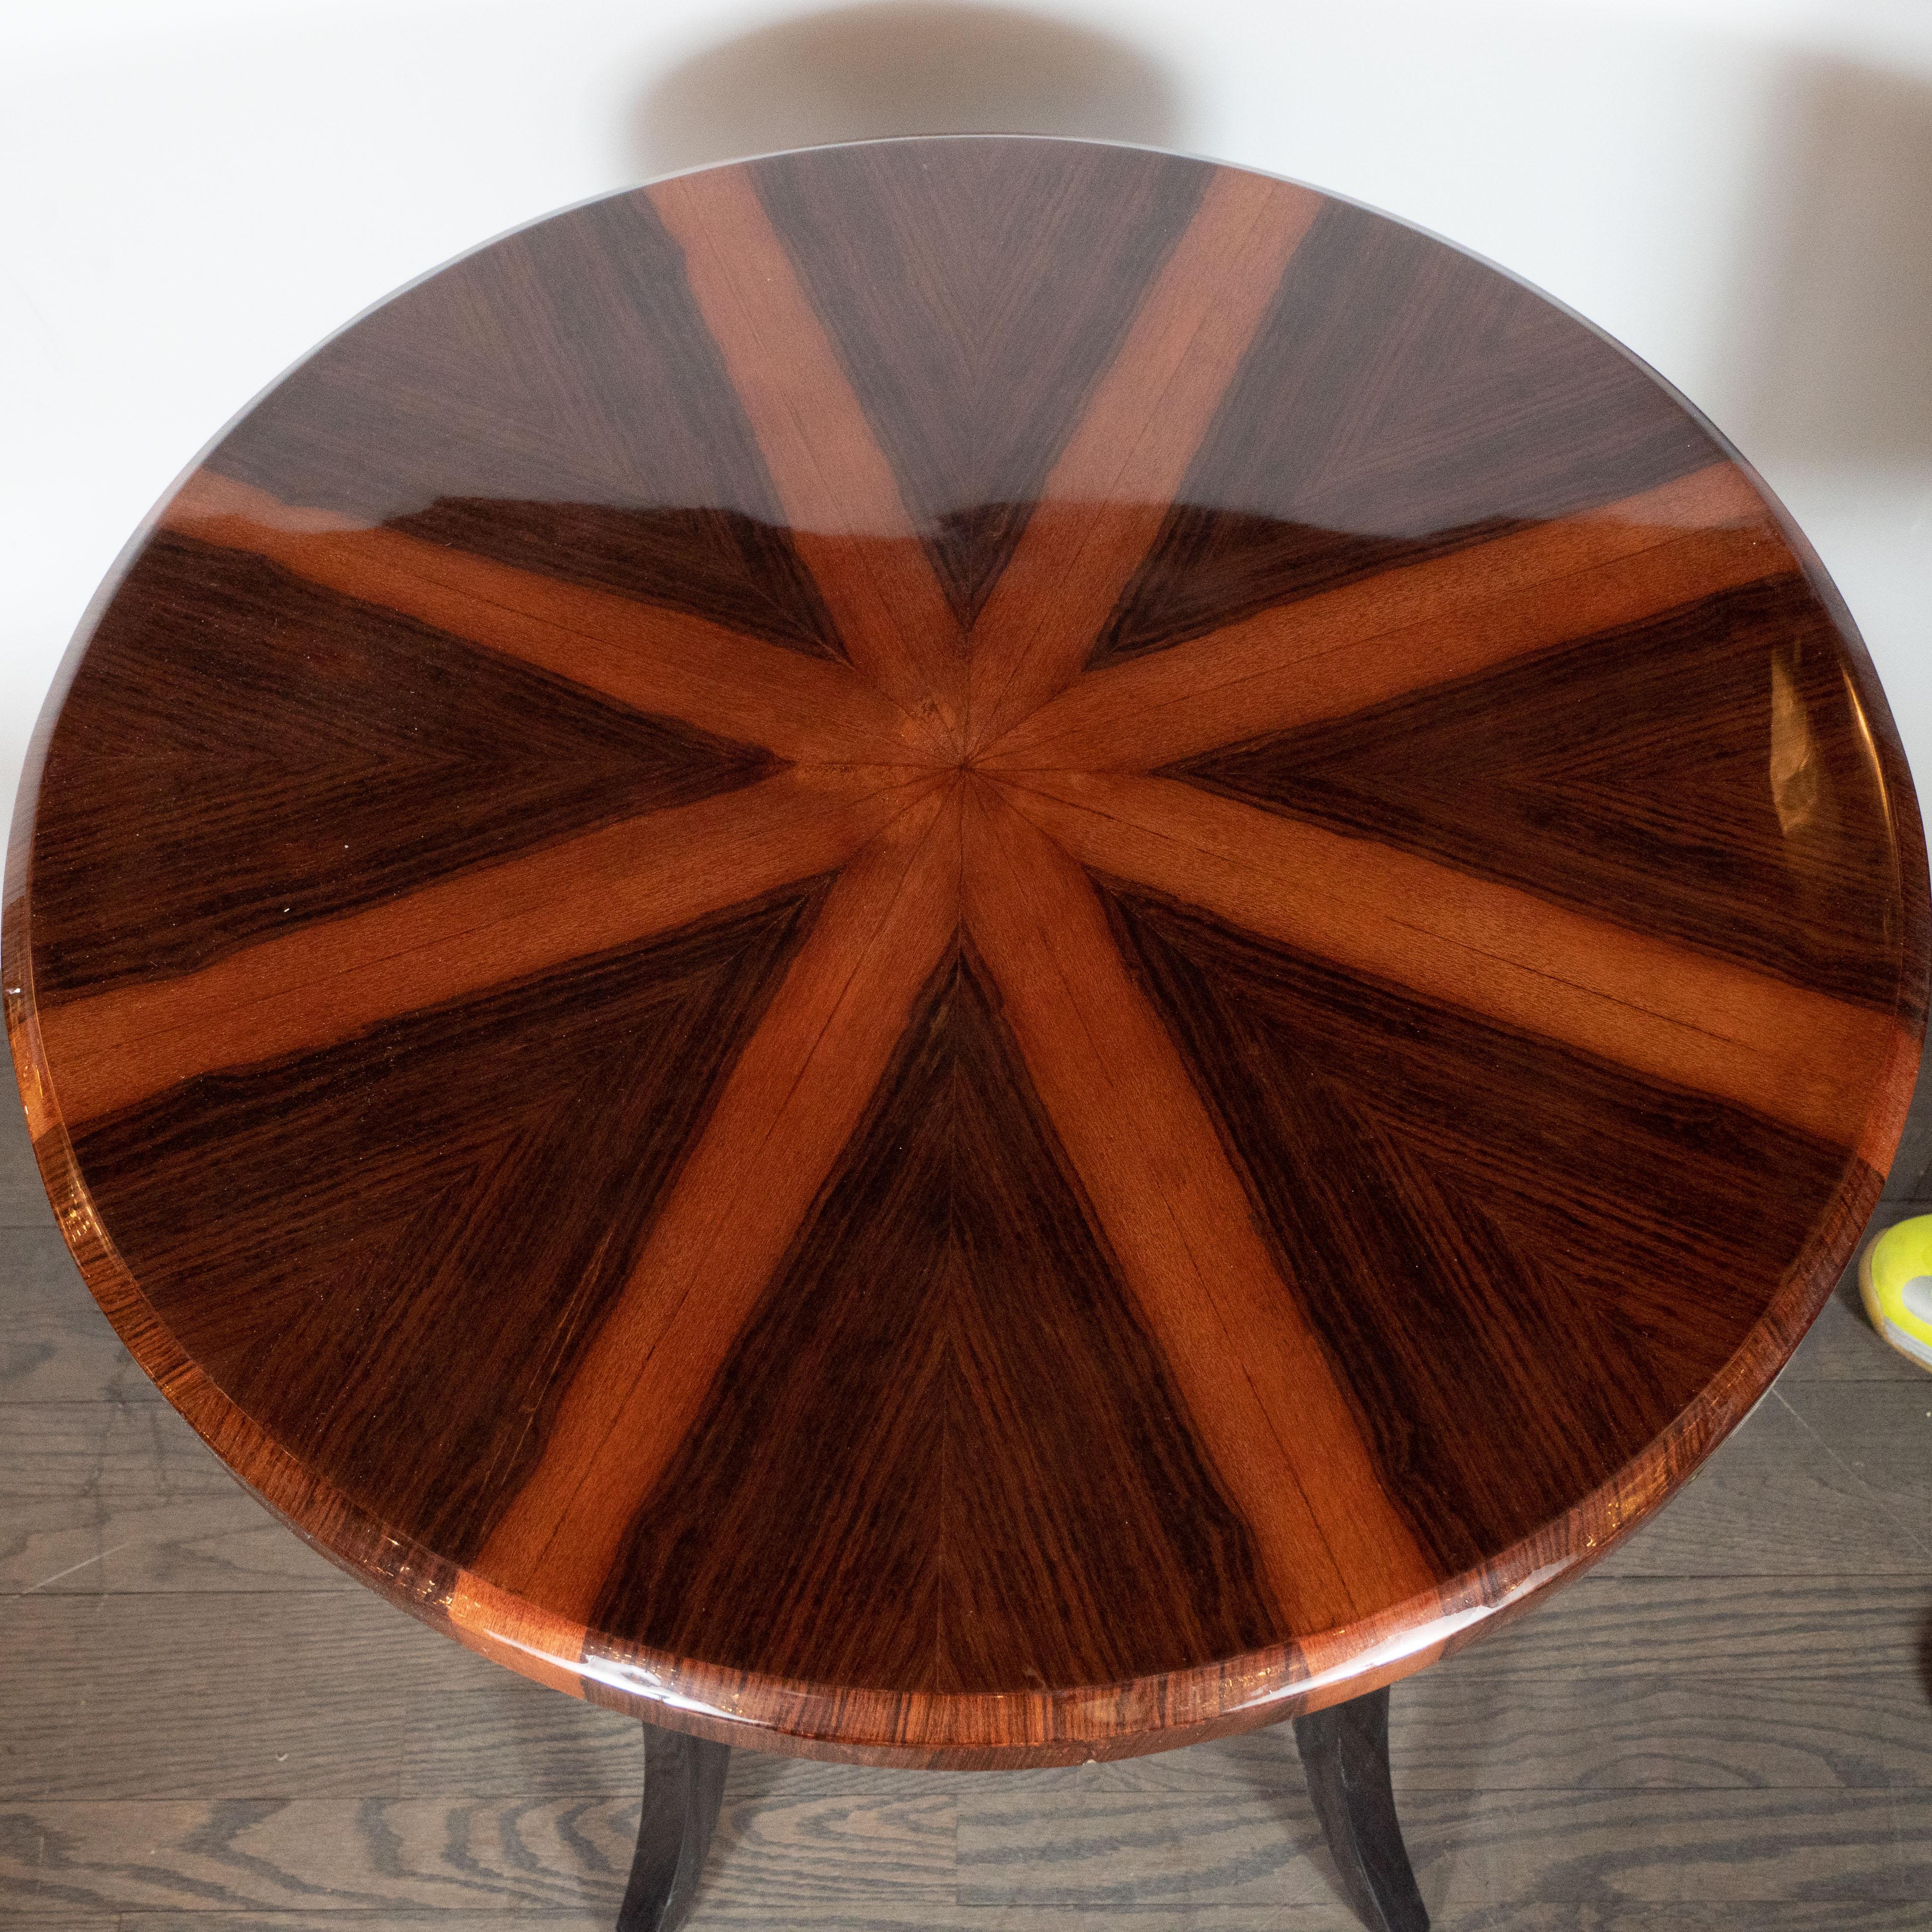 Art Deco Gueridon Table with Bookmatched Starburst Walnut and Carpathian Elm Top 1